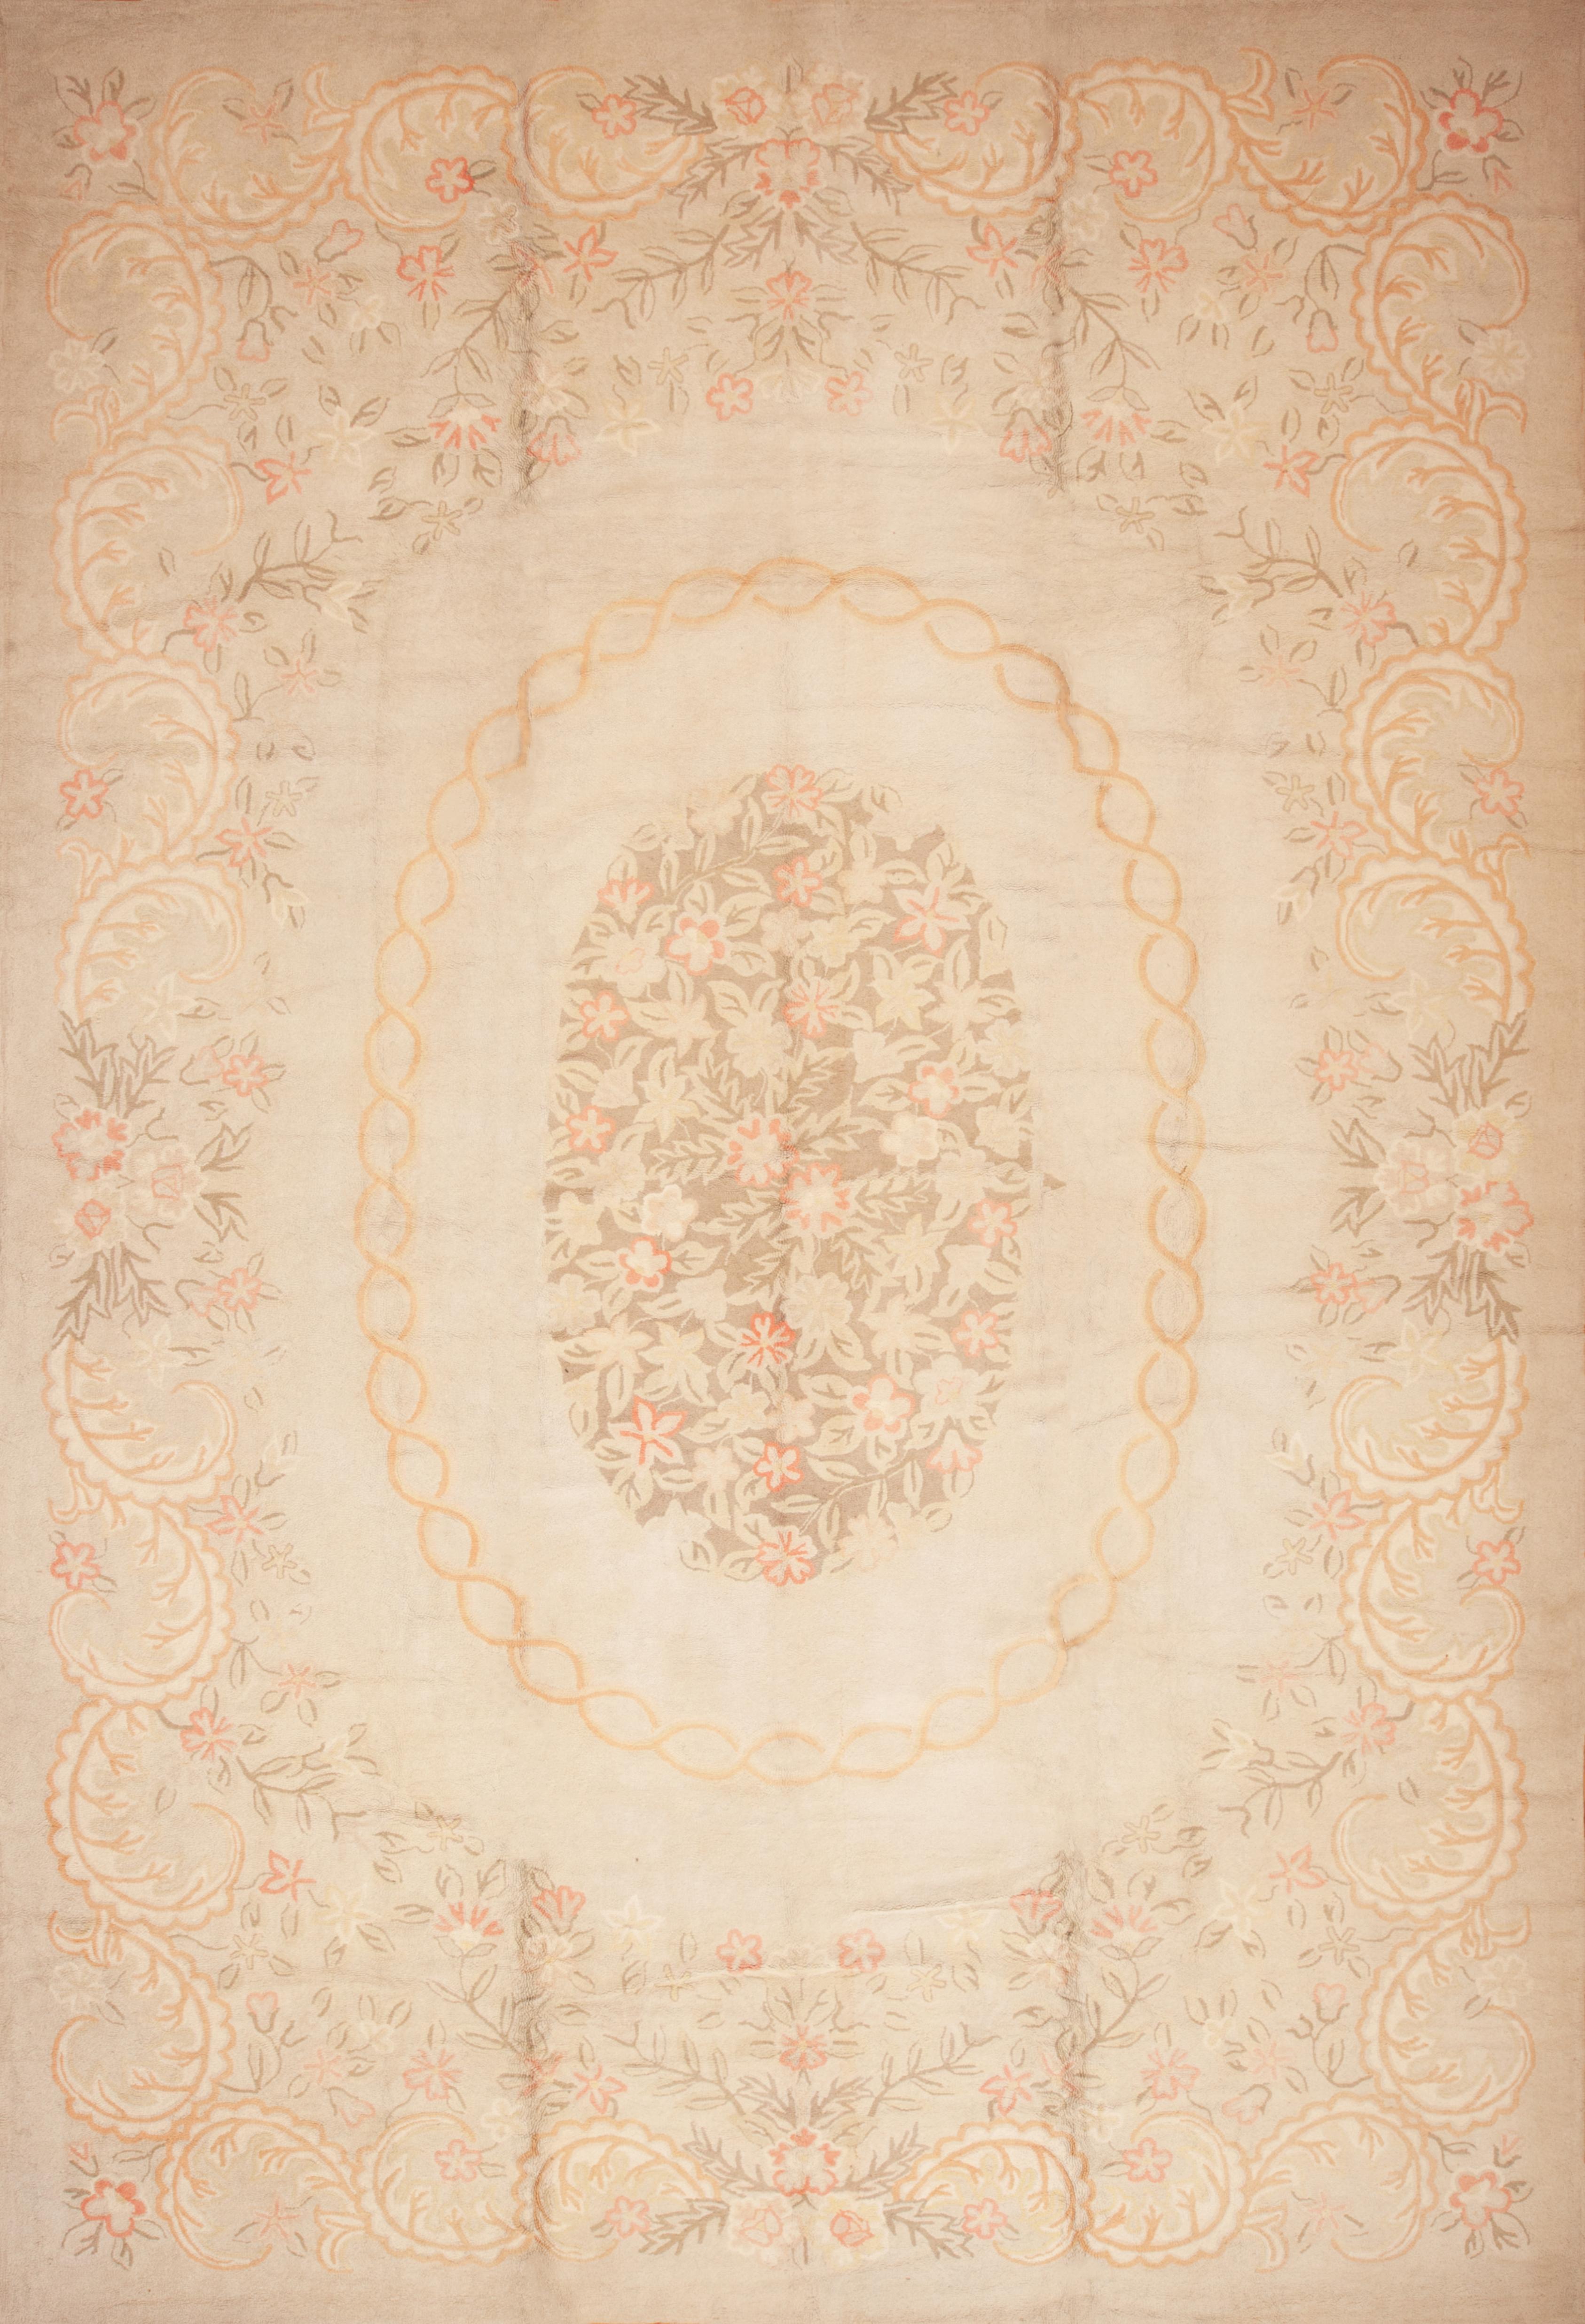 What is a Savonnerie rug?